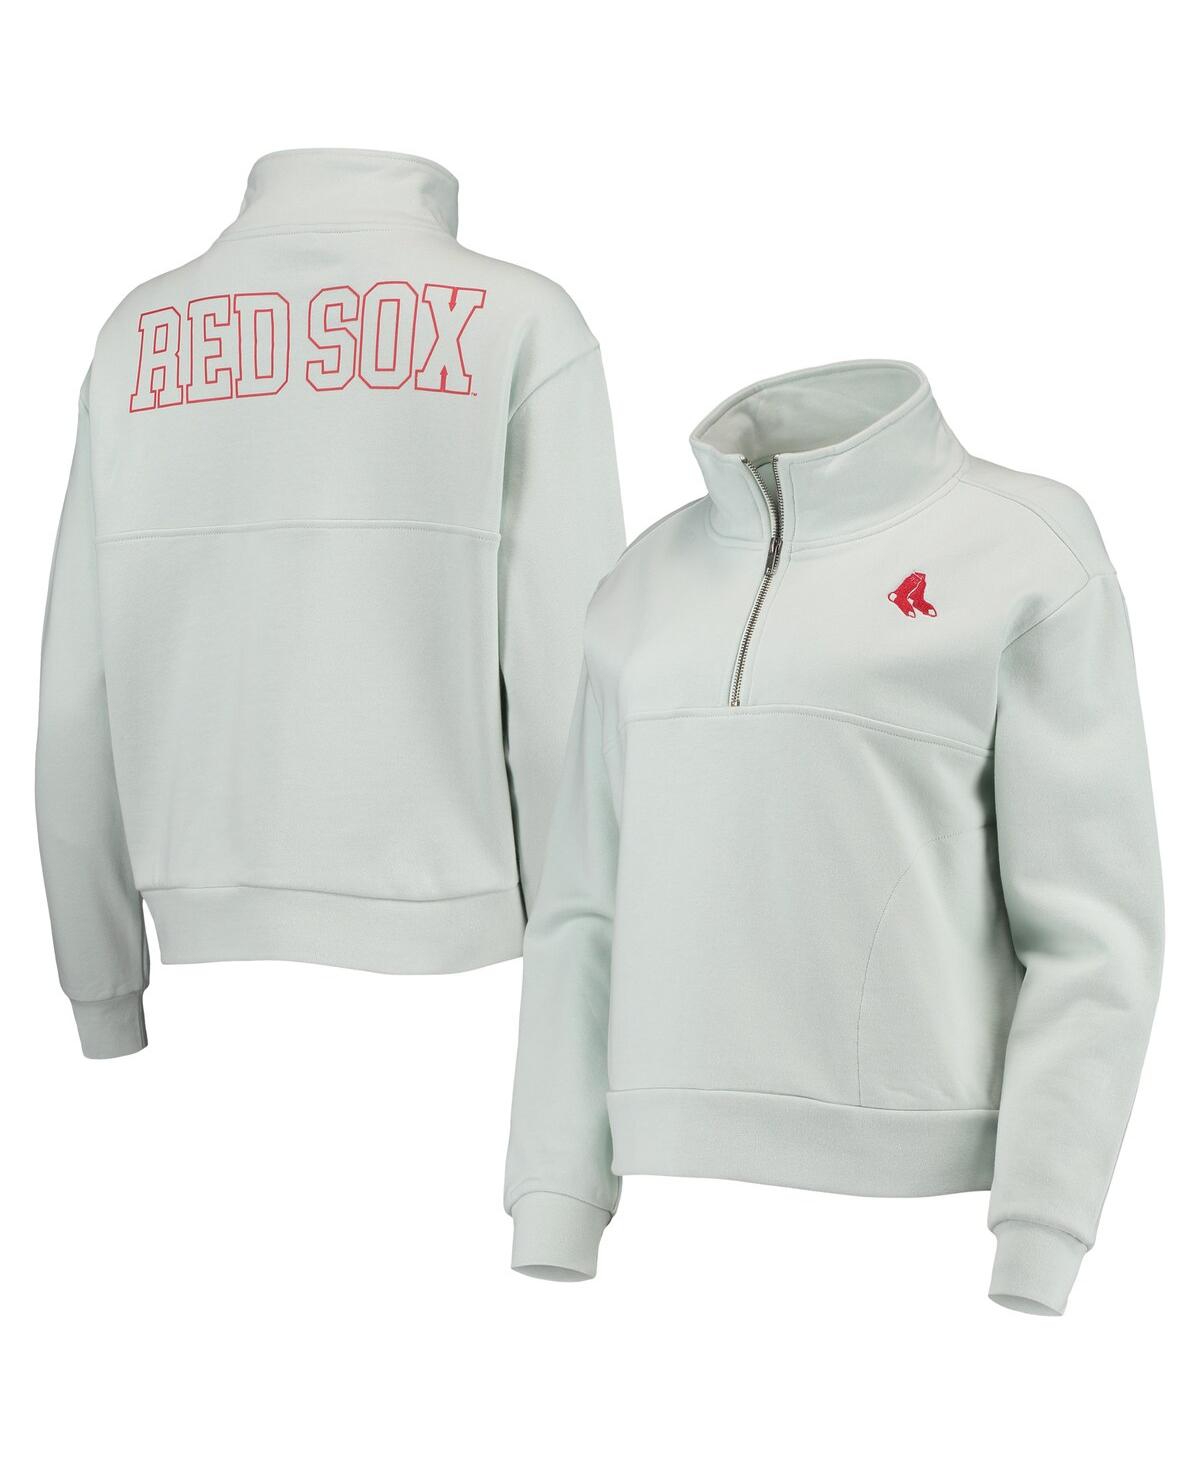 THE WILD COLLECTIVE WOMEN'S THE WILD COLLECTIVE LIGHT BLUE BOSTON RED SOX TWO-HIT QUARTER-ZIP PULLOVER TOP